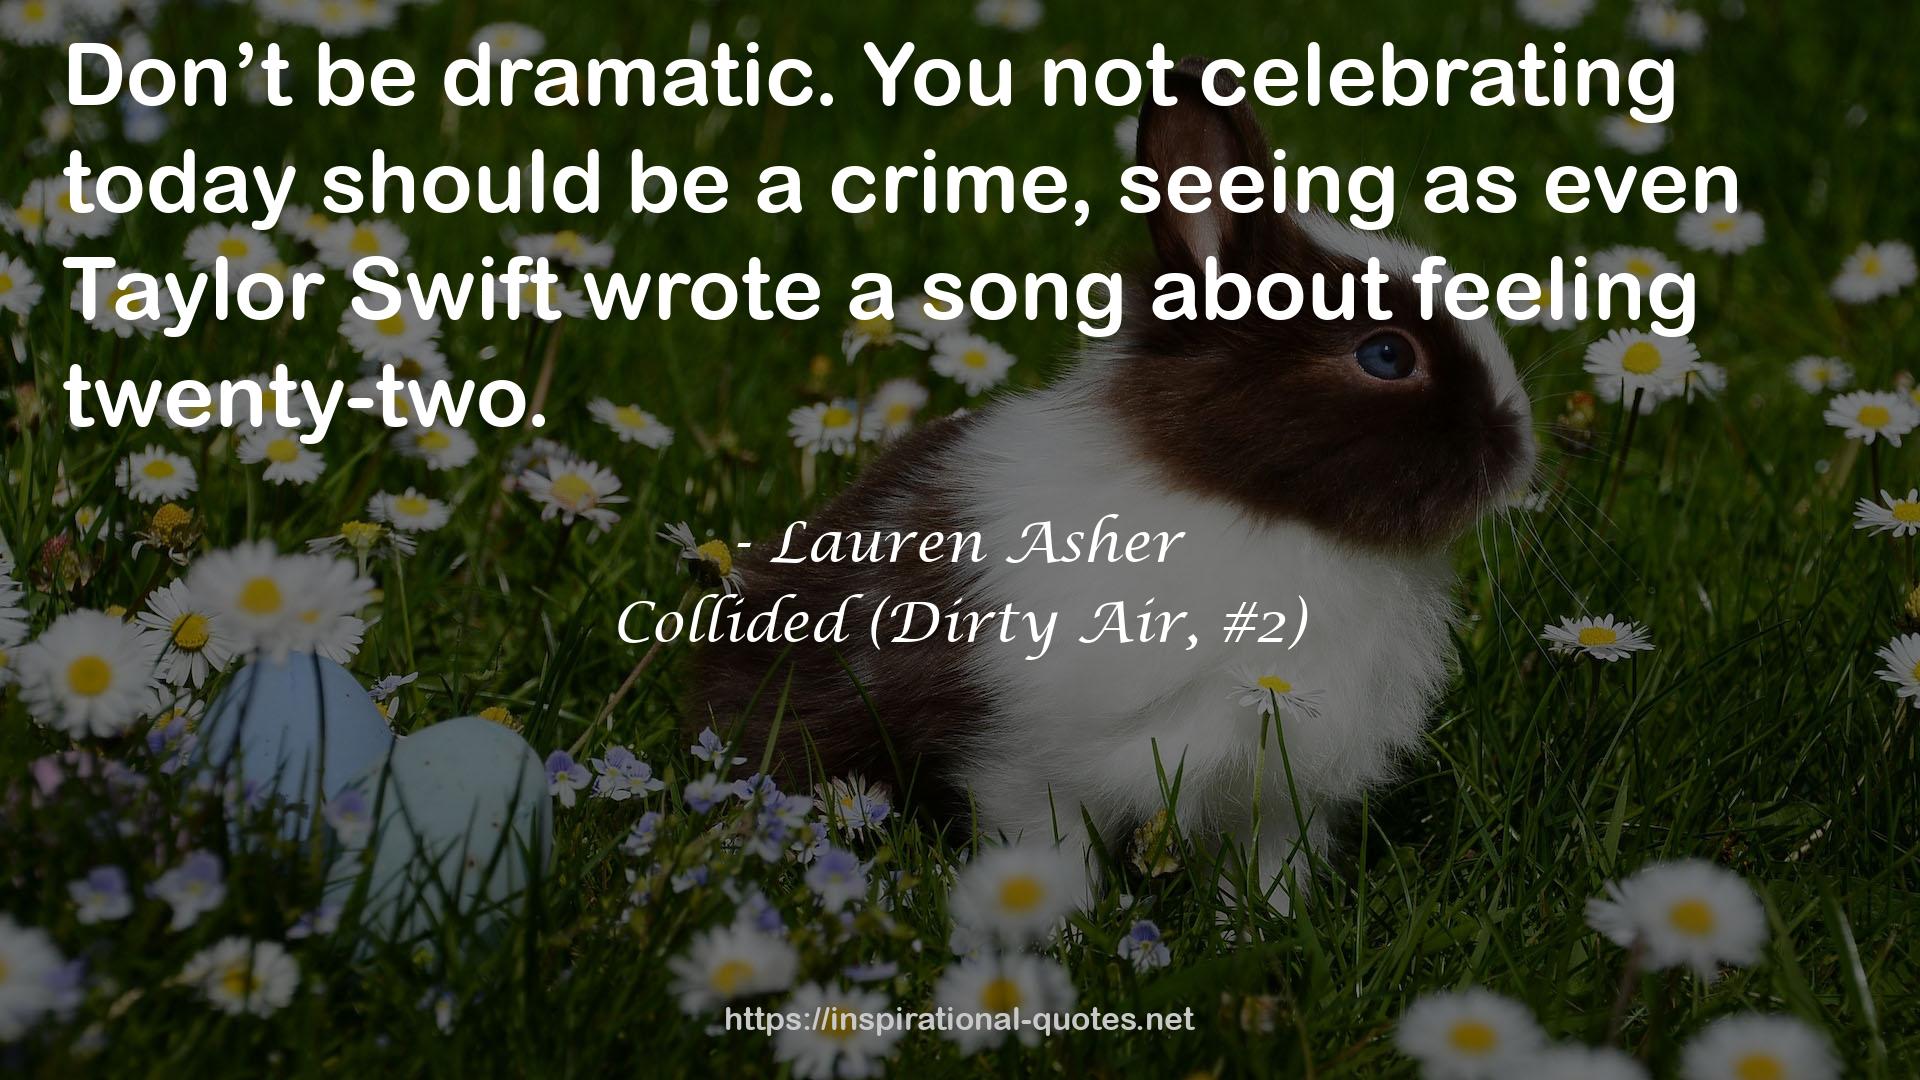 Collided (Dirty Air, #2) QUOTES